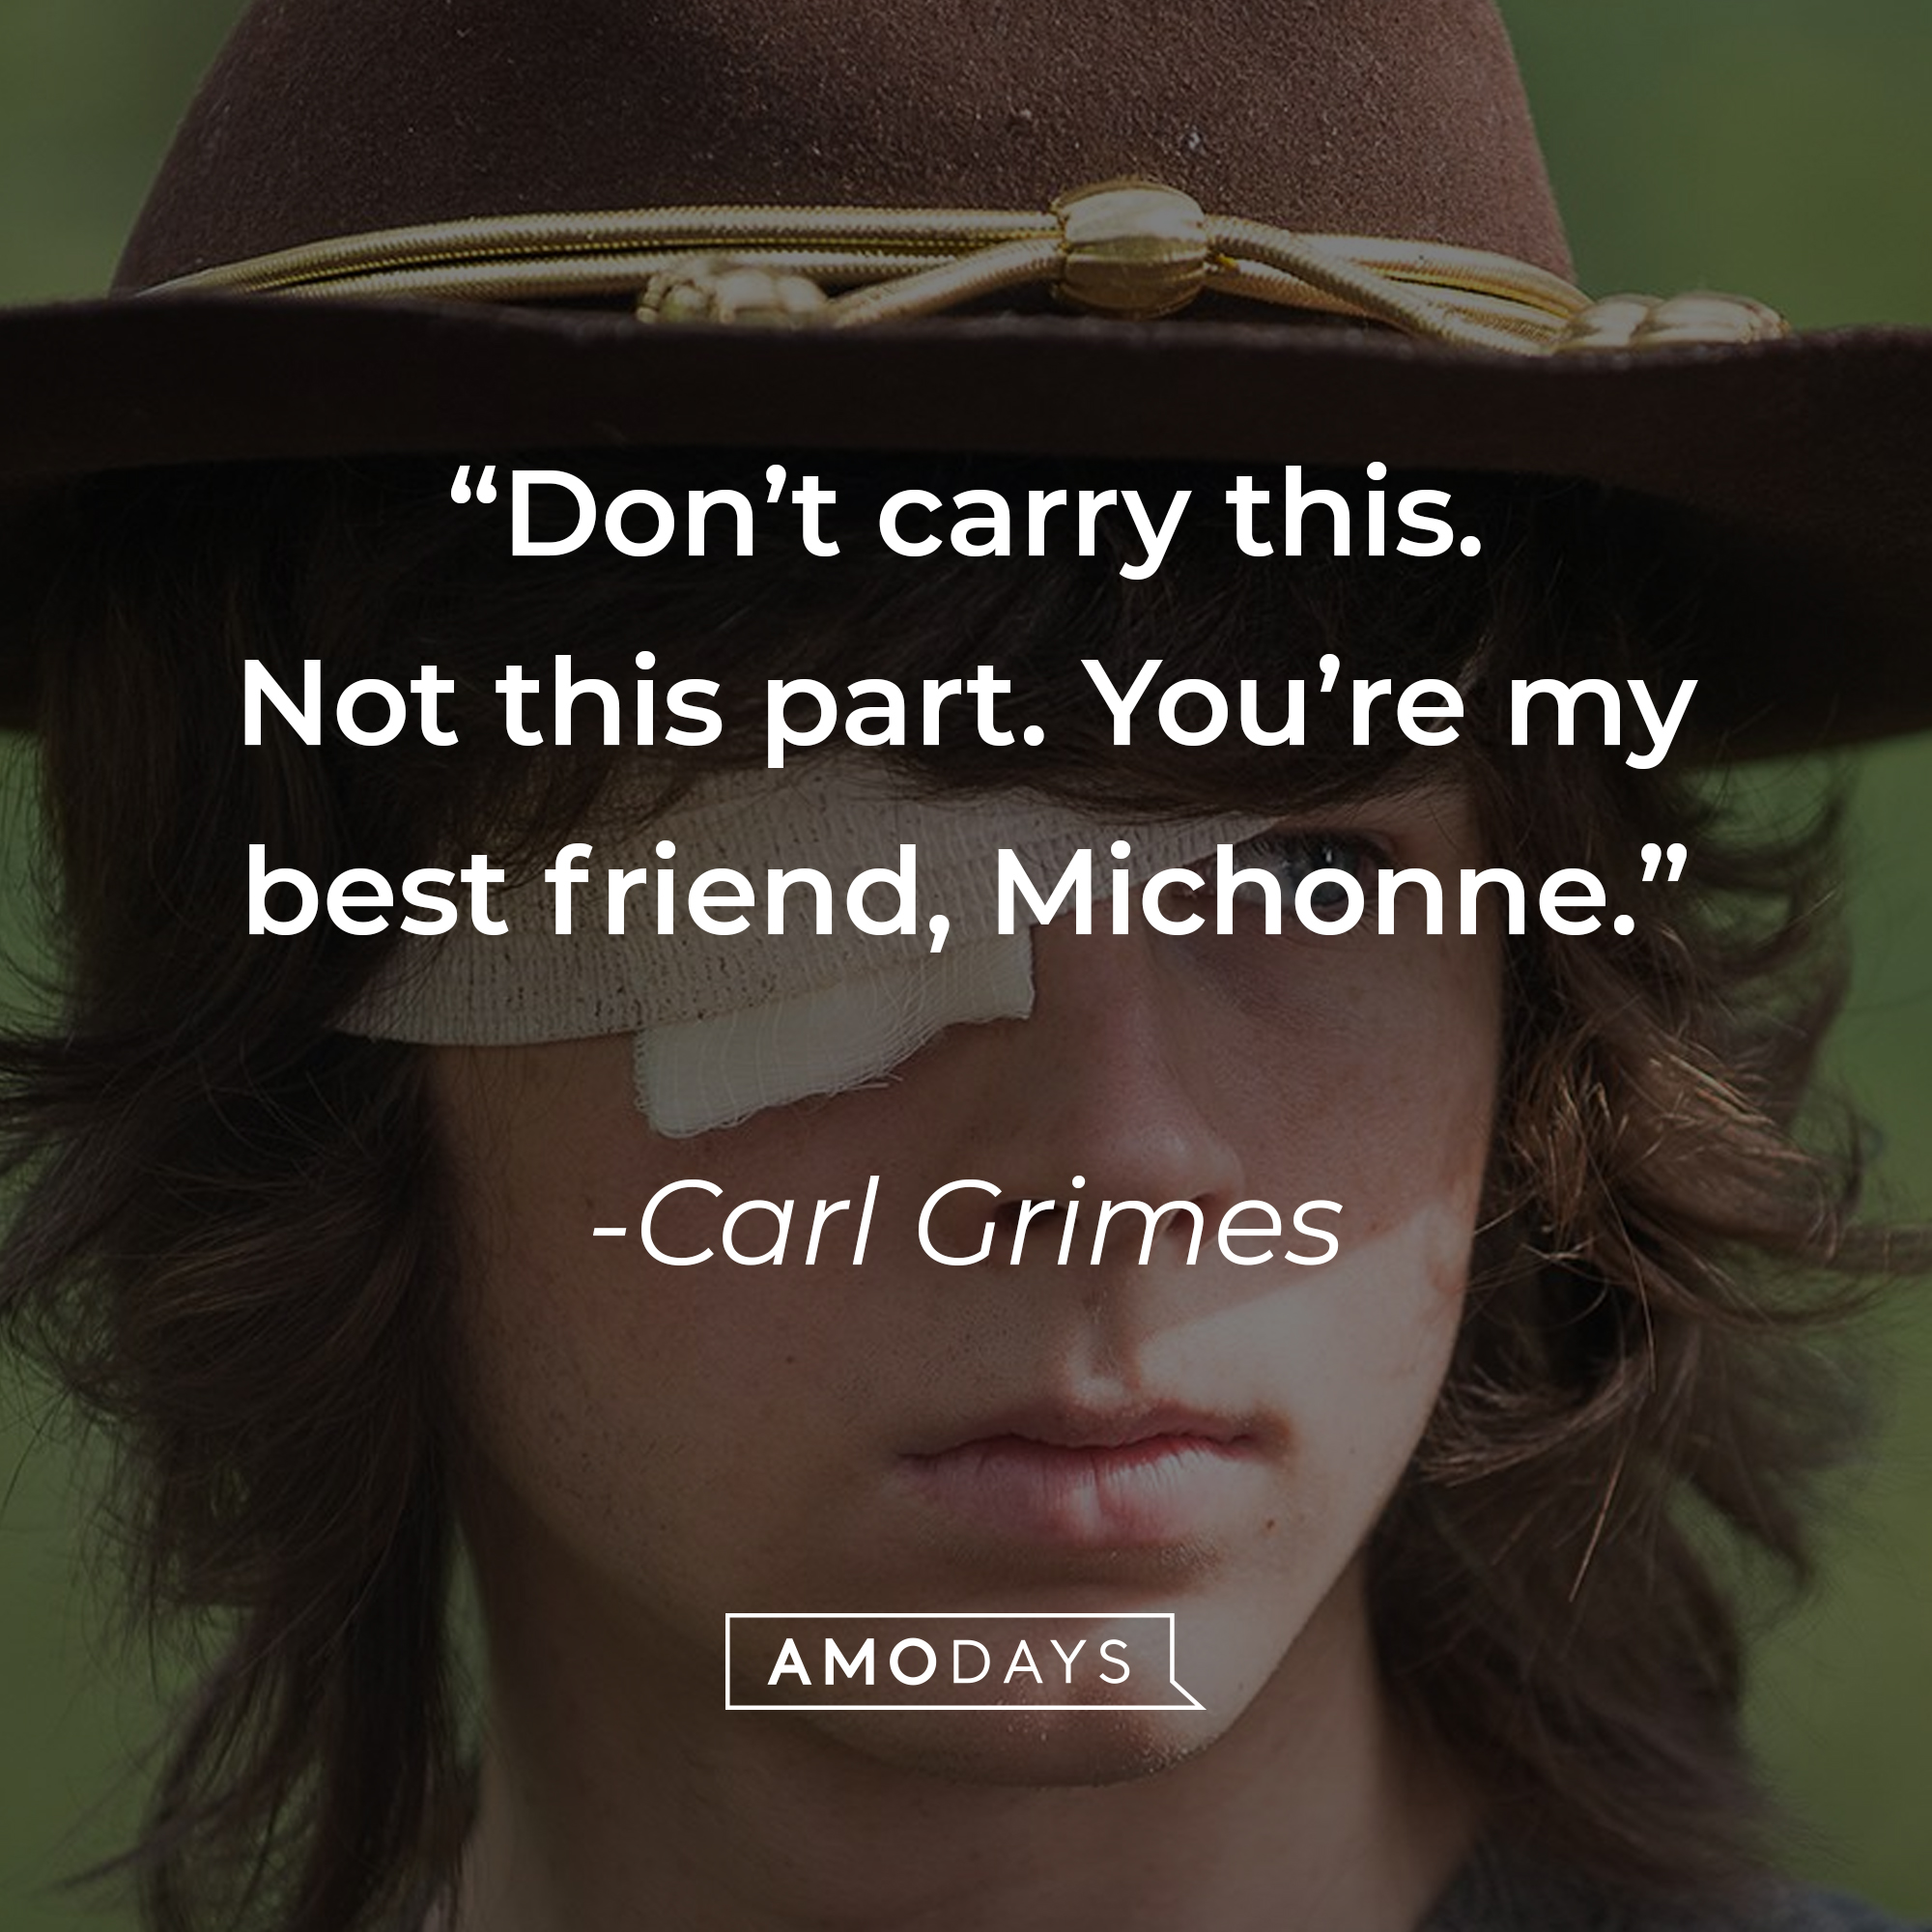 Carl Grimes, with his quote “Don’t carry this. Not this part. You’re my best friend, Michonne.” | Source: facebook.com/TheWalkingDeadAMC